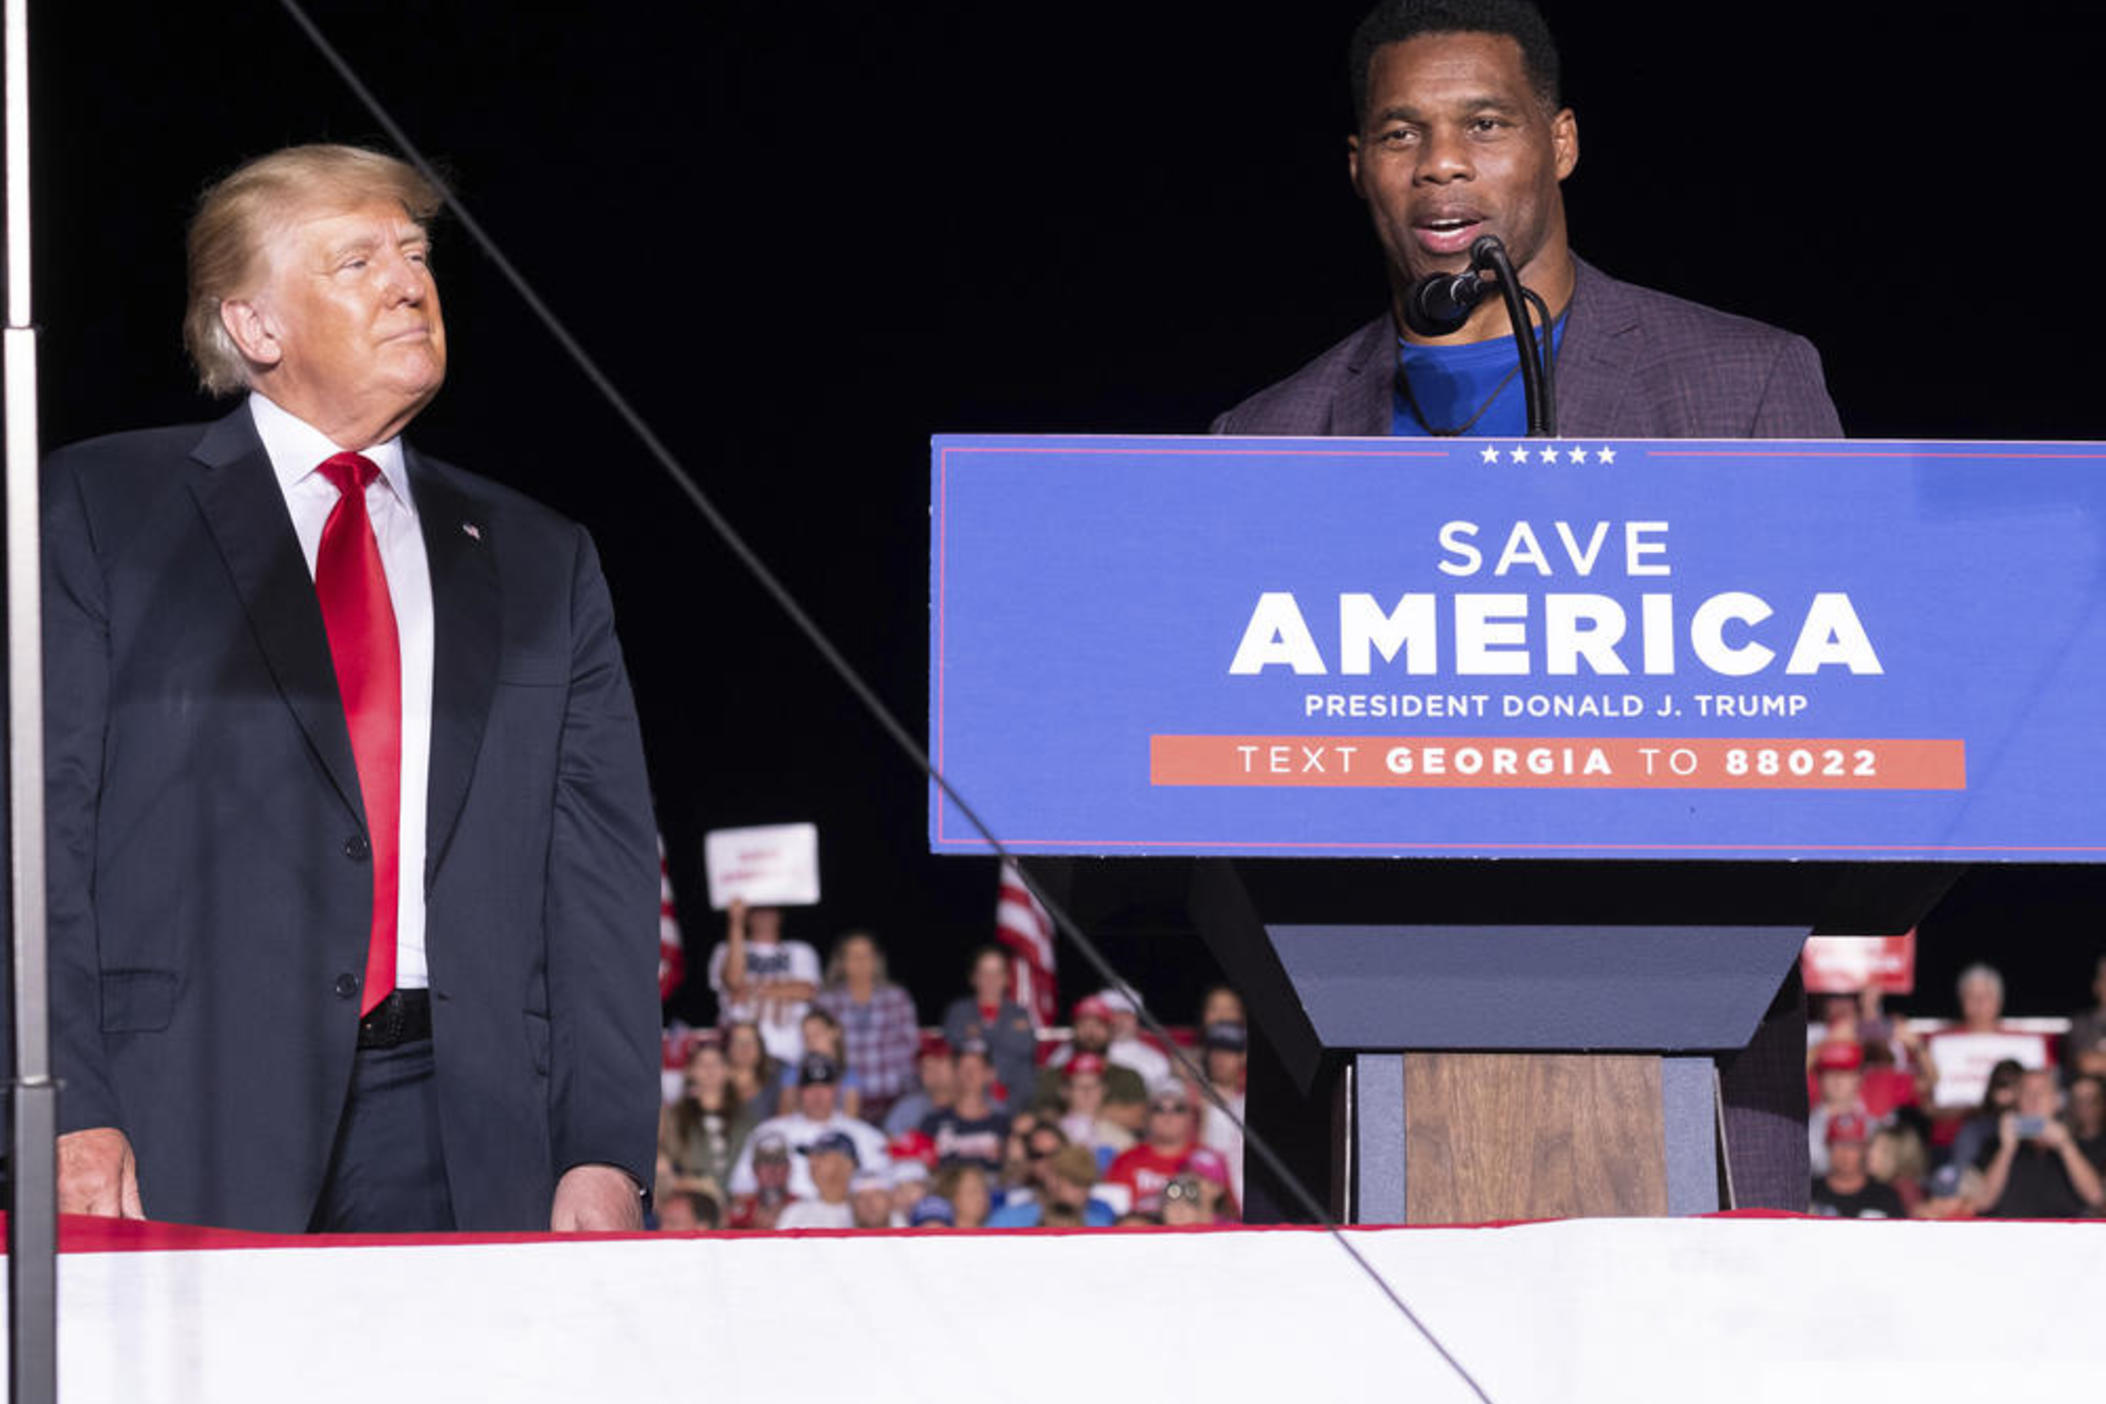 Former President Donald Trump listens as Georgia Senate candidate Herschel Walker speaks during his Save America rally in Perry, Ga., on Saturday, Sept. 25, 2021.